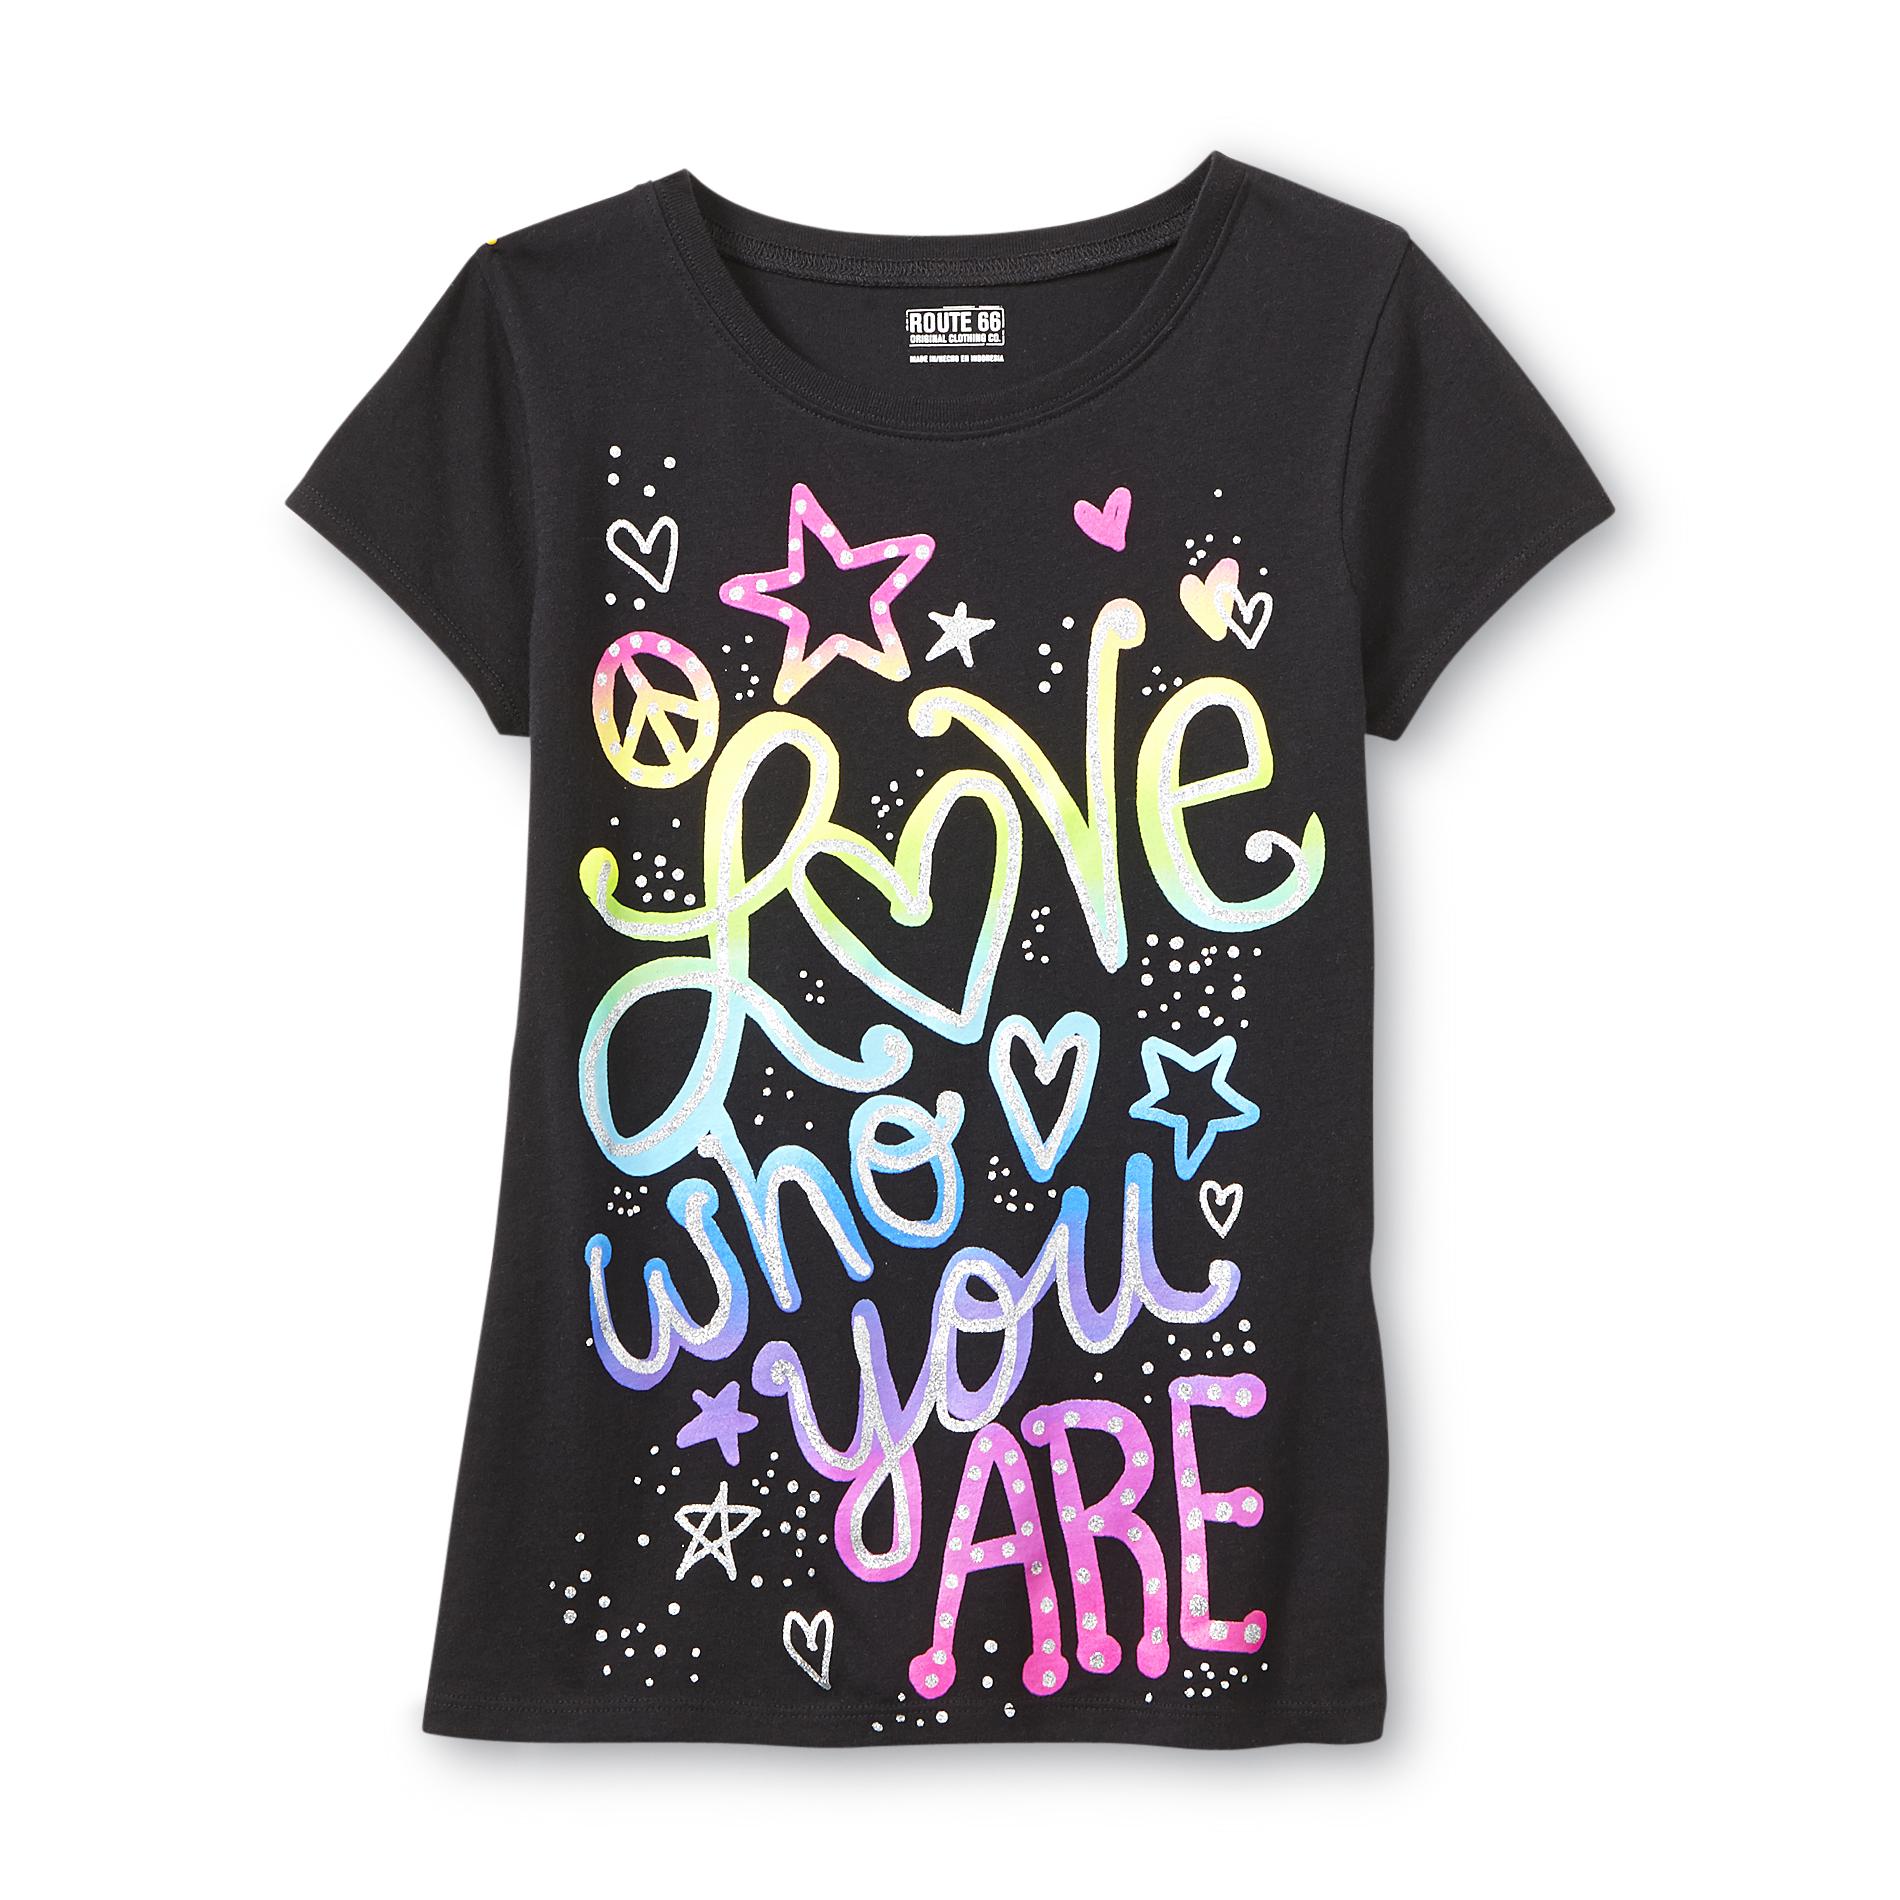 Route 66 Girl's Graphic T-Shirt - Love Who You Are